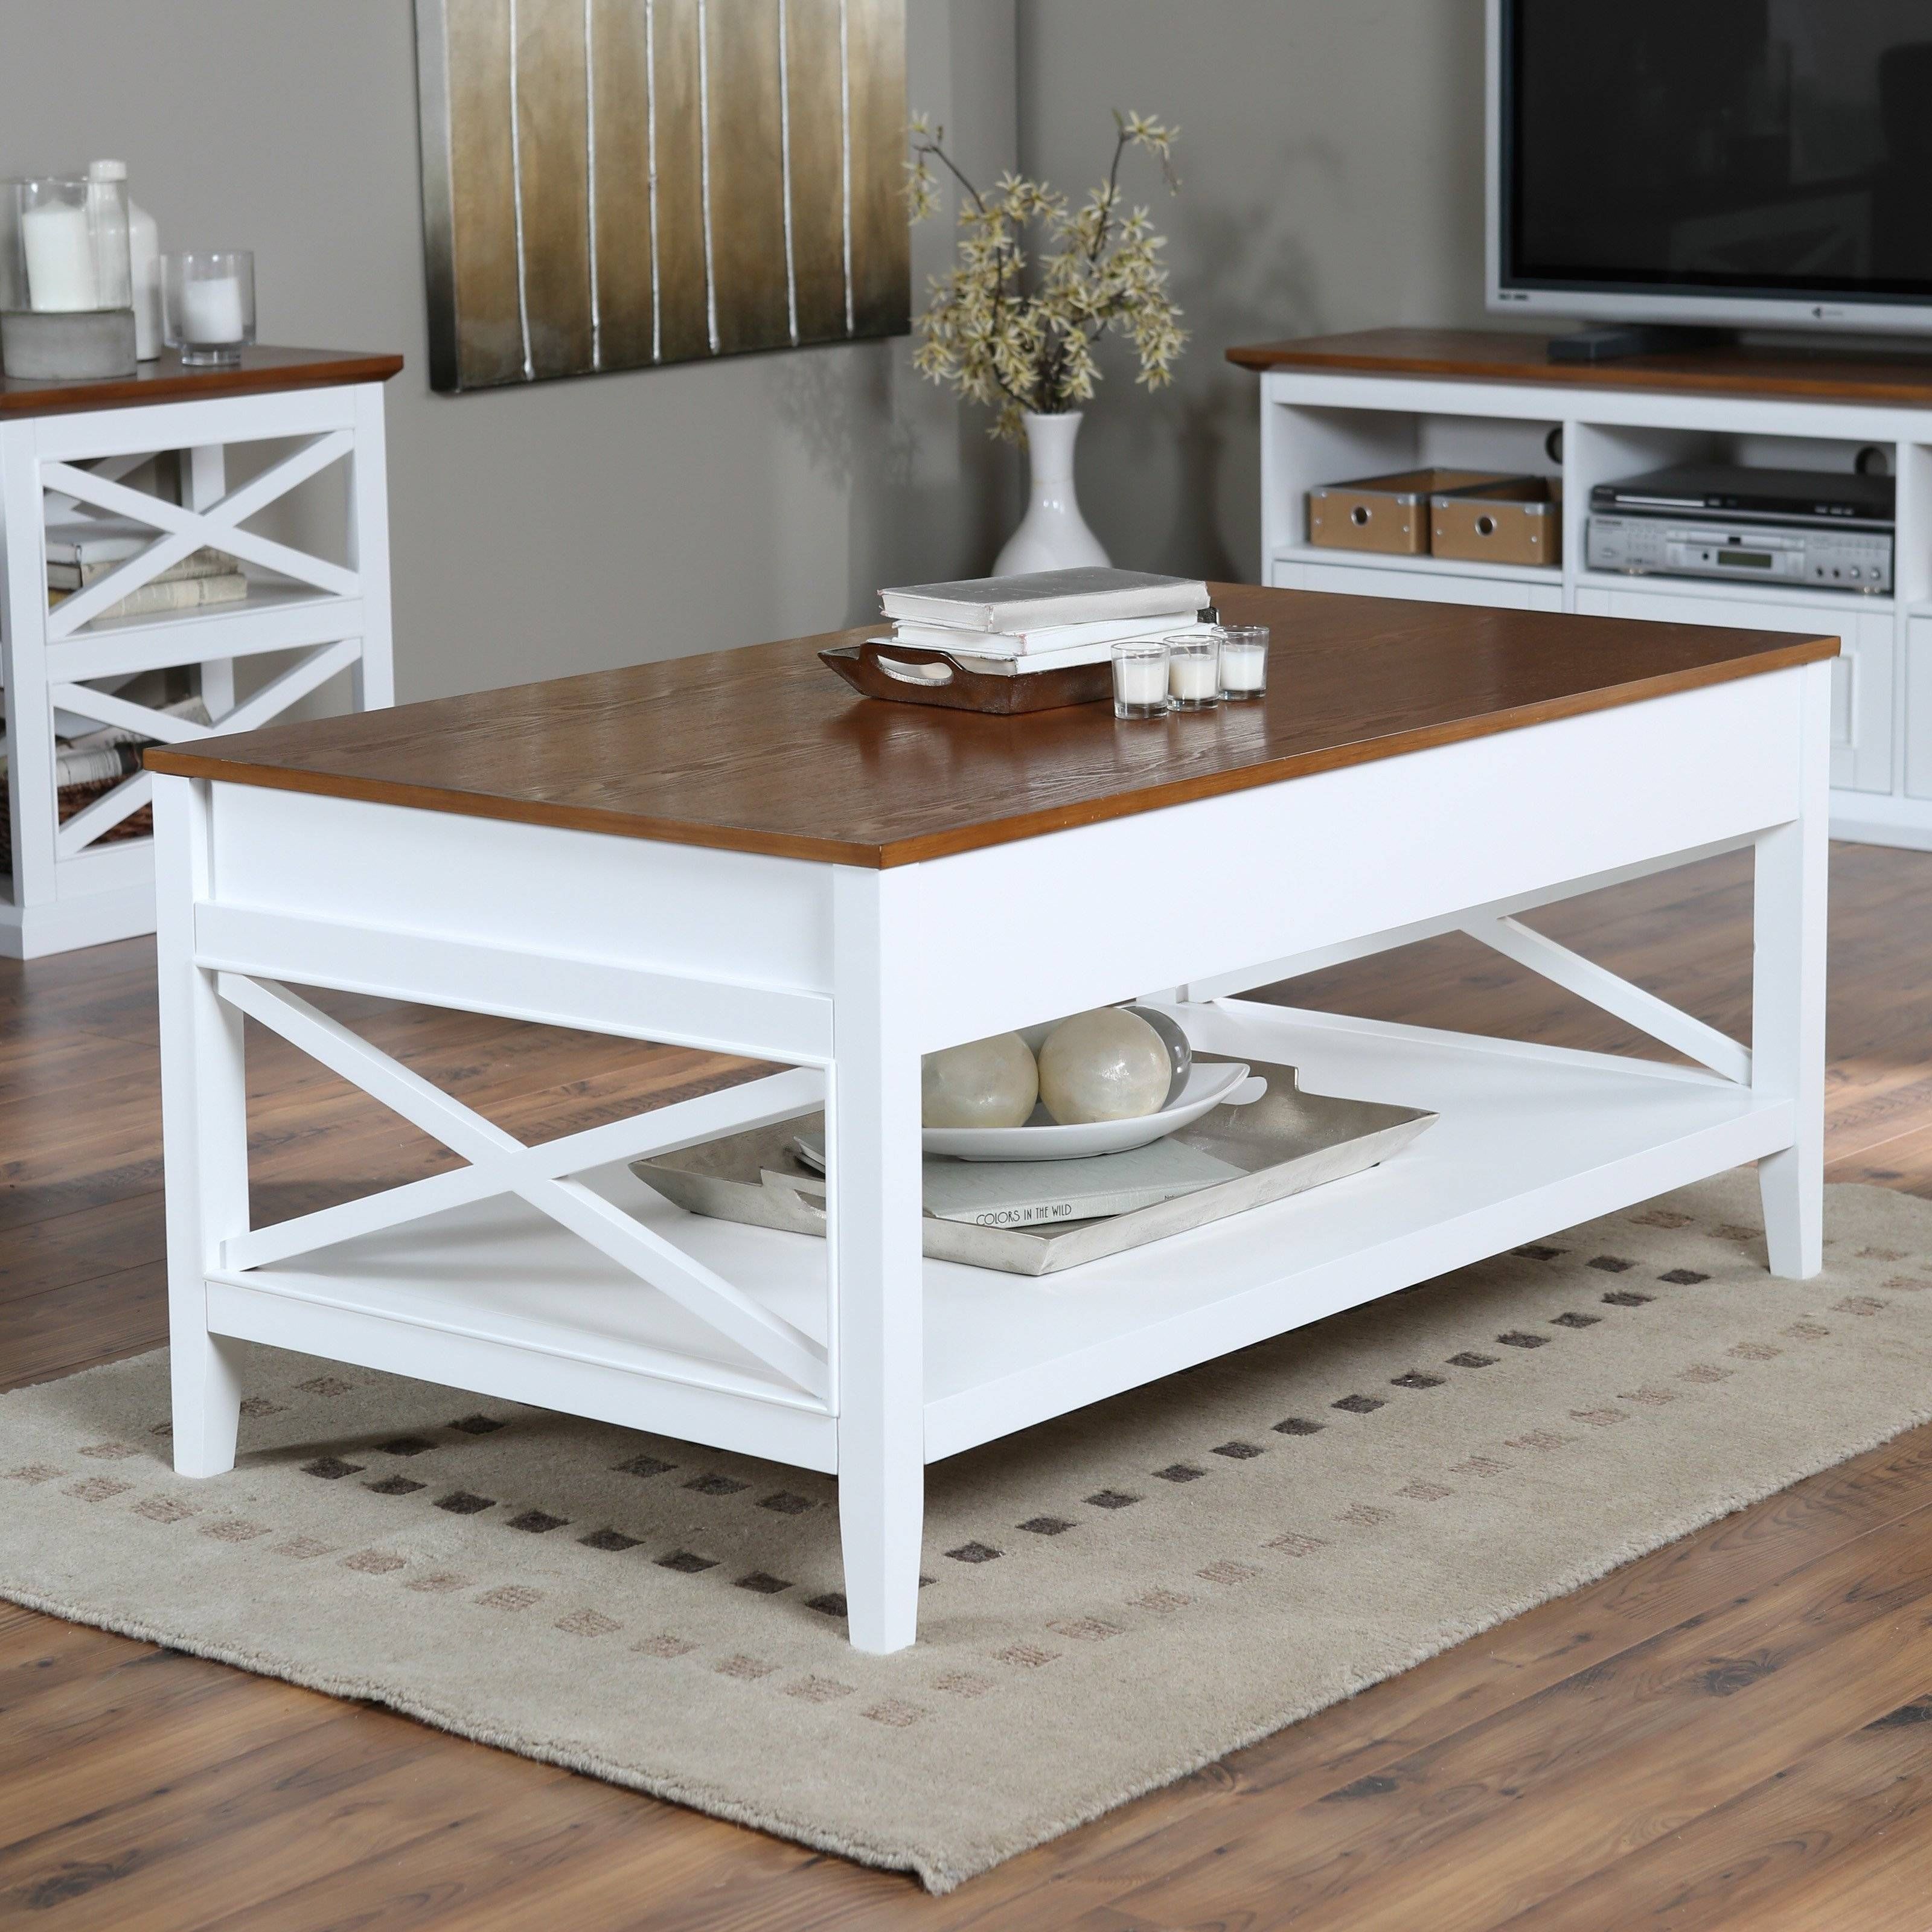 Belham Living Hampton Storage And Lift Top Coffee Table | Hayneedle Throughout Lift Top Oak Coffee Tables (View 2 of 30)